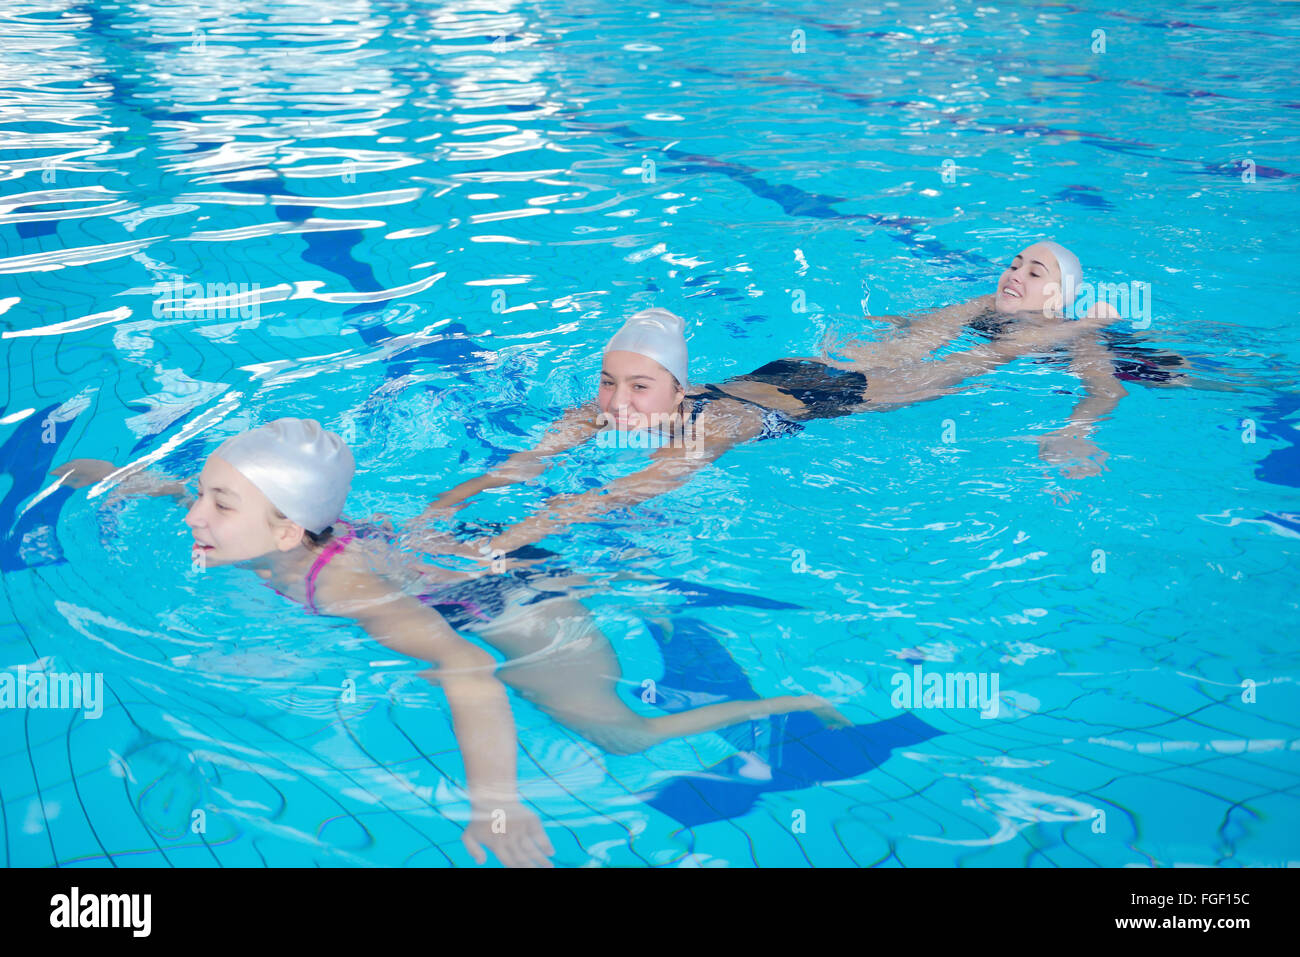 help and rescue on swimming pool Stock Photo